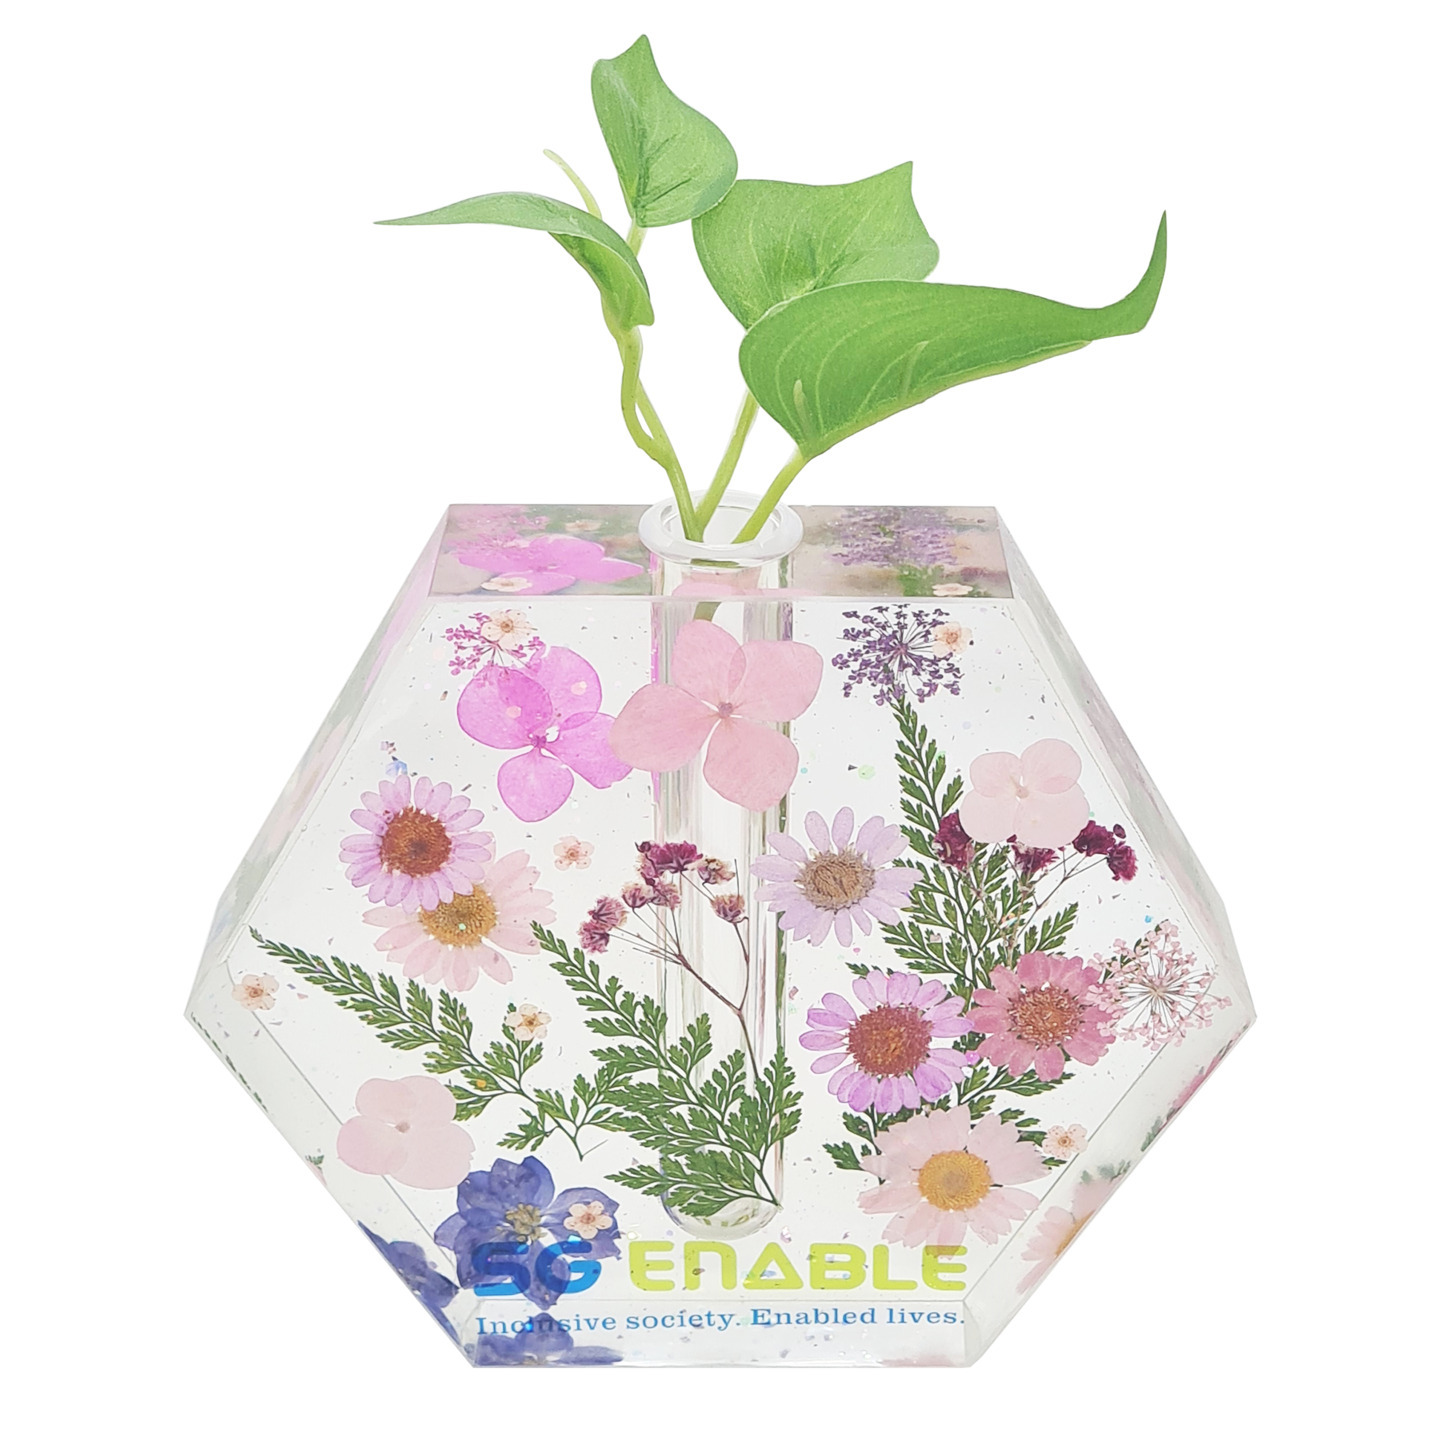 Resin Plaque Vase with glass tube Real flowers & leaves Handmade by PWD  Custom message with namelogo